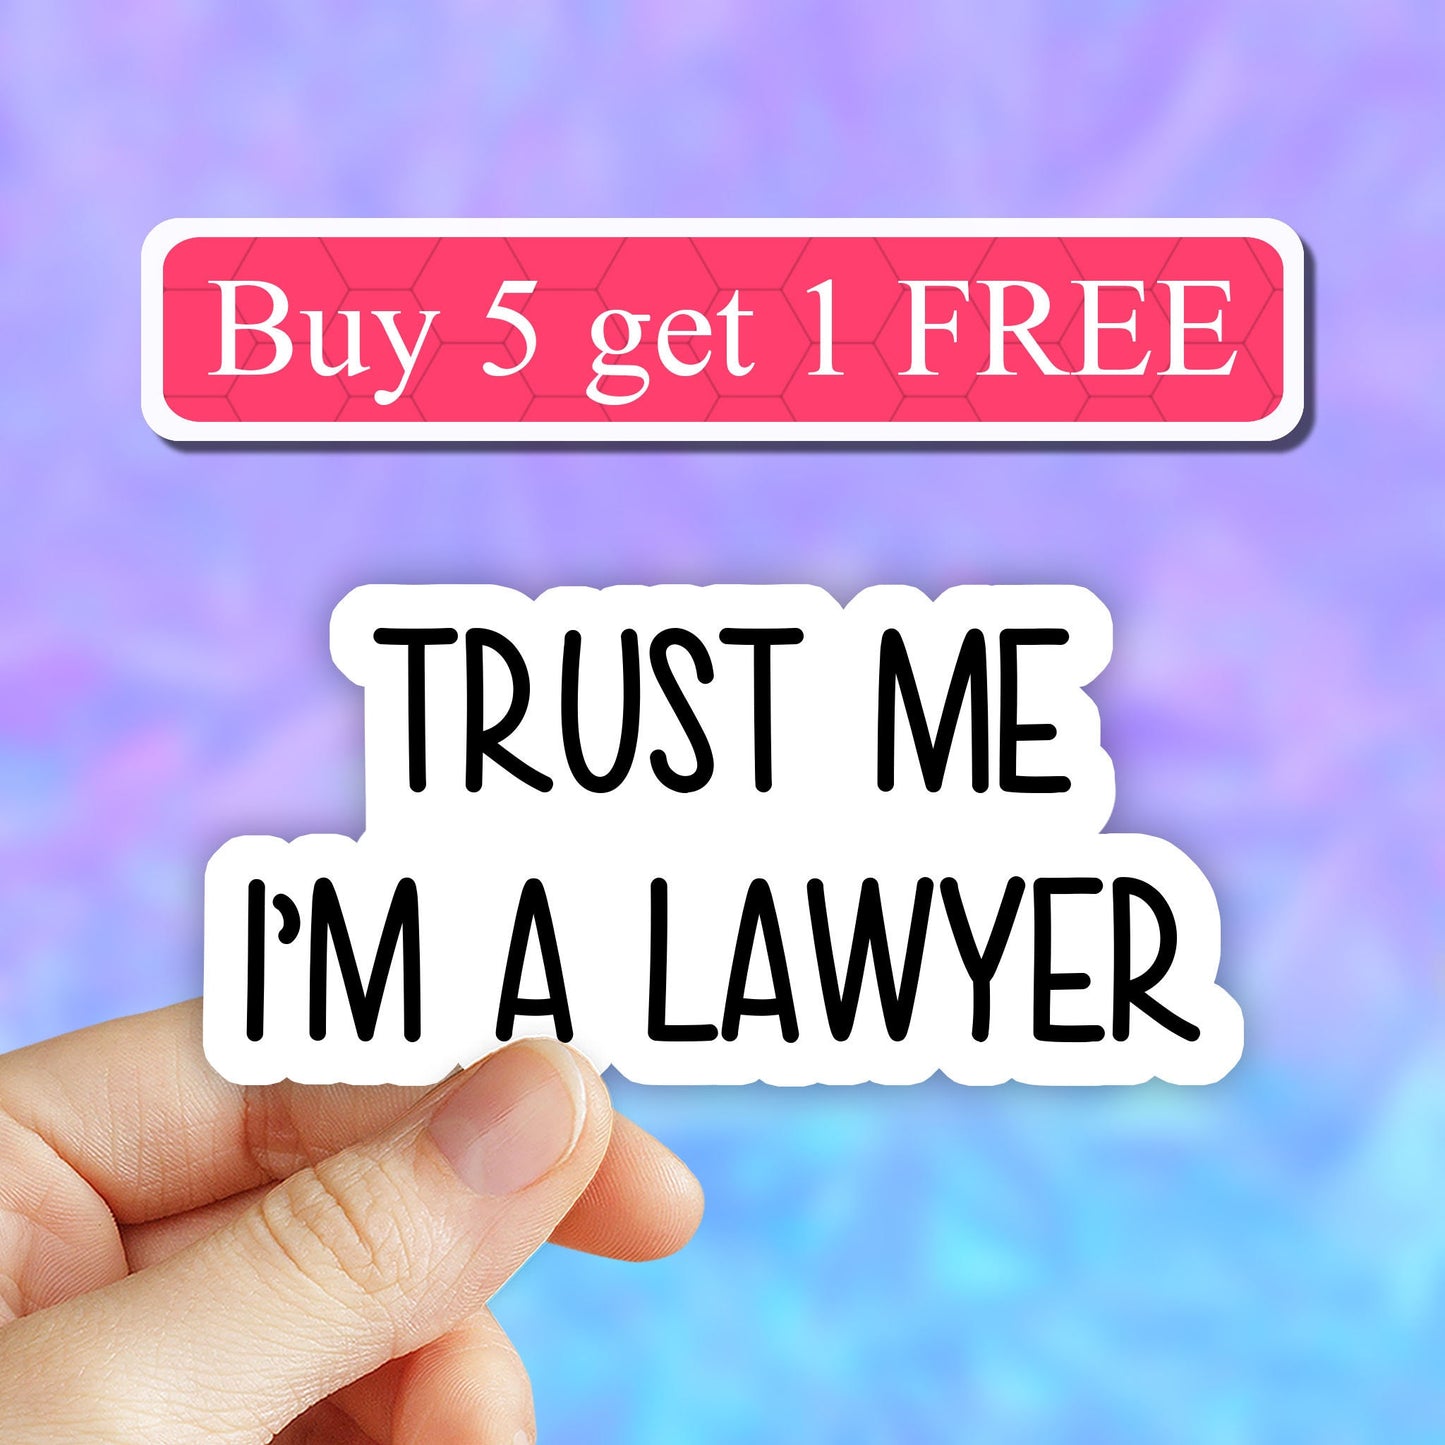 Trust Me I'm a Lawyer Sticker, Lawyer Life Sticker, Lawyer Stickers Laptop Decals, Stickers for Water Bottles and Laptop, Funny Lawyer decal